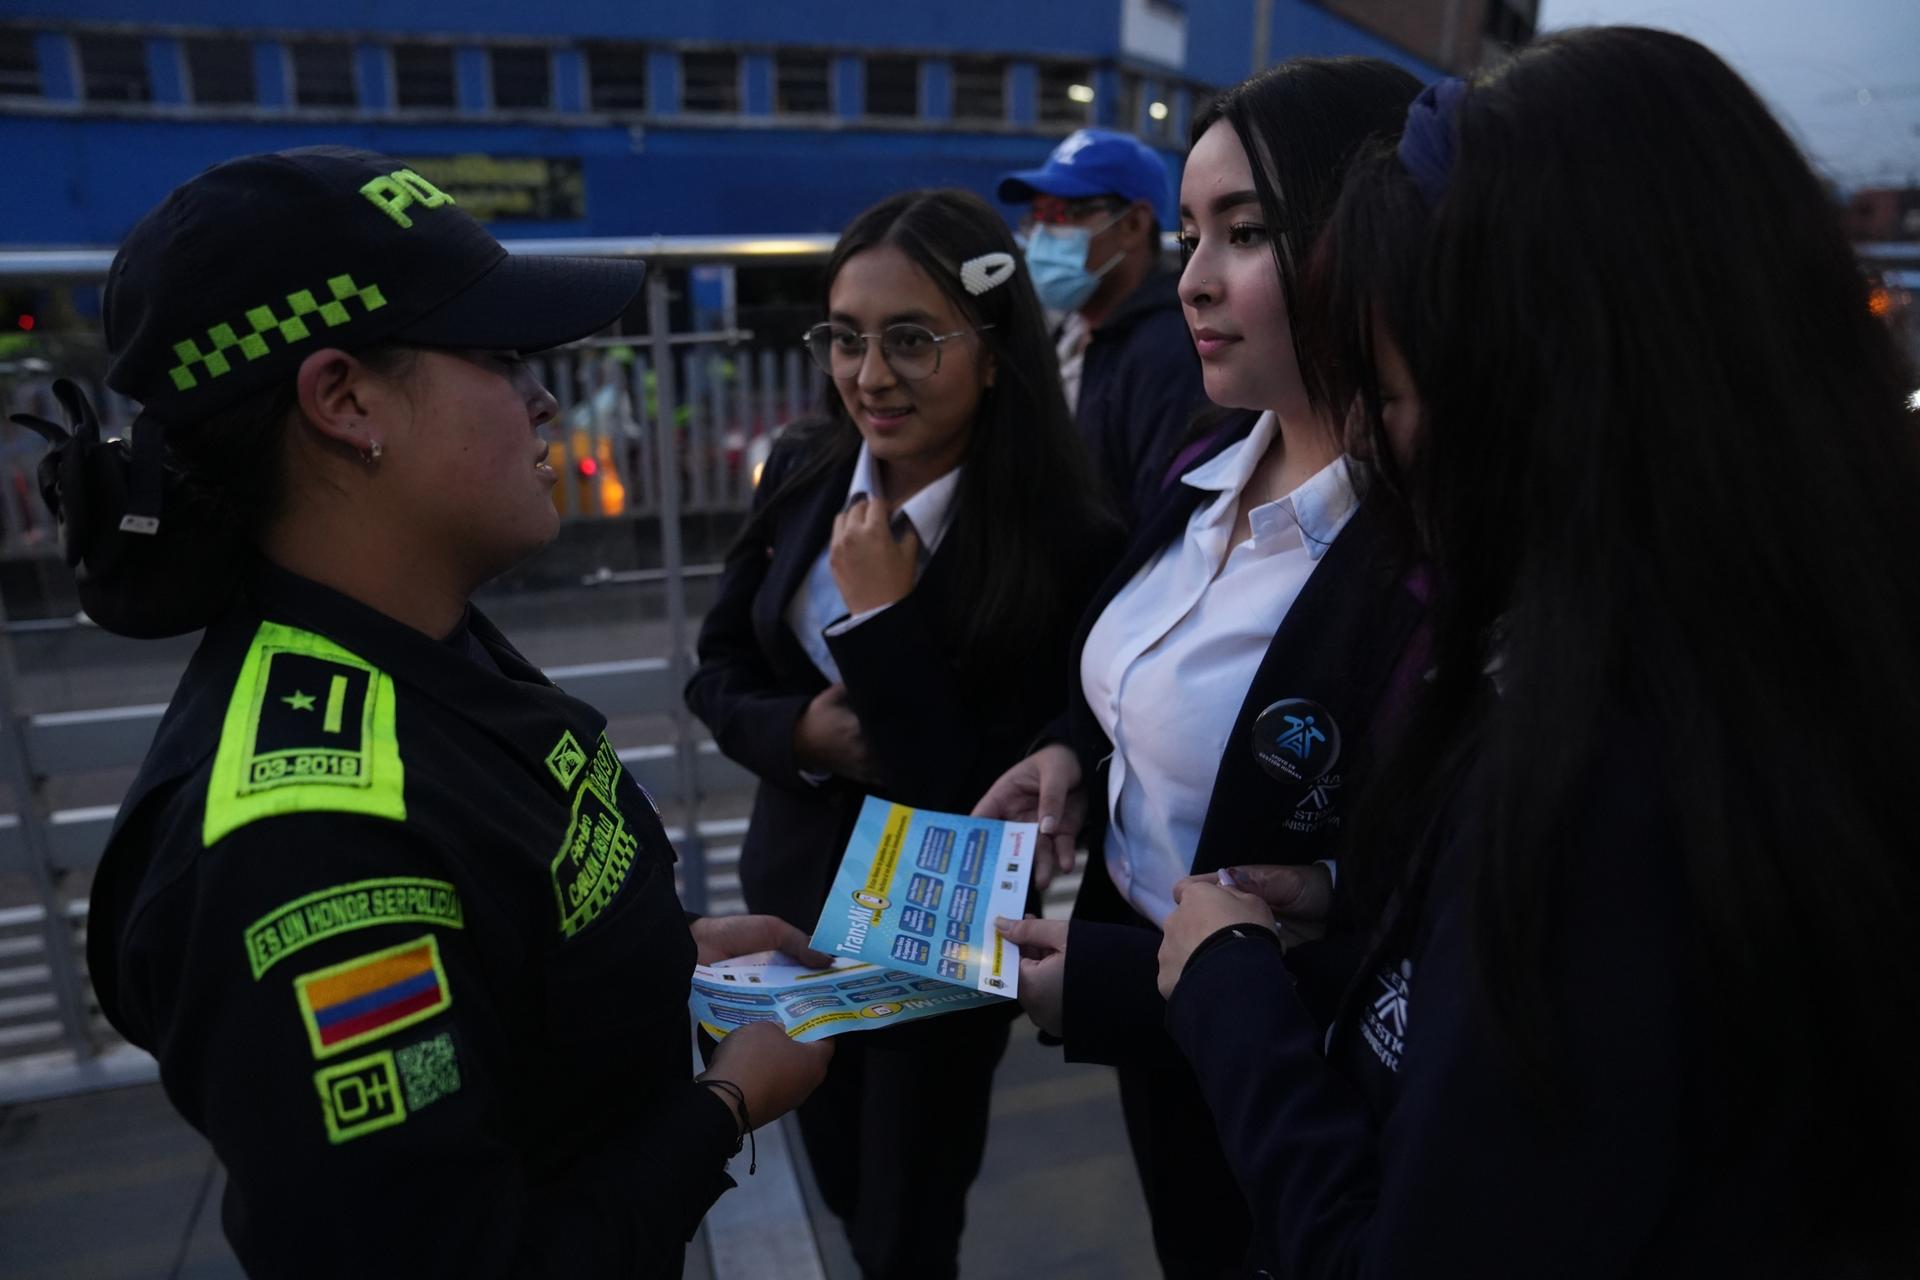 A police officer in Bogota, hands out leaflets that encourage women to report cases of sexual harassment in the city's public transport system.